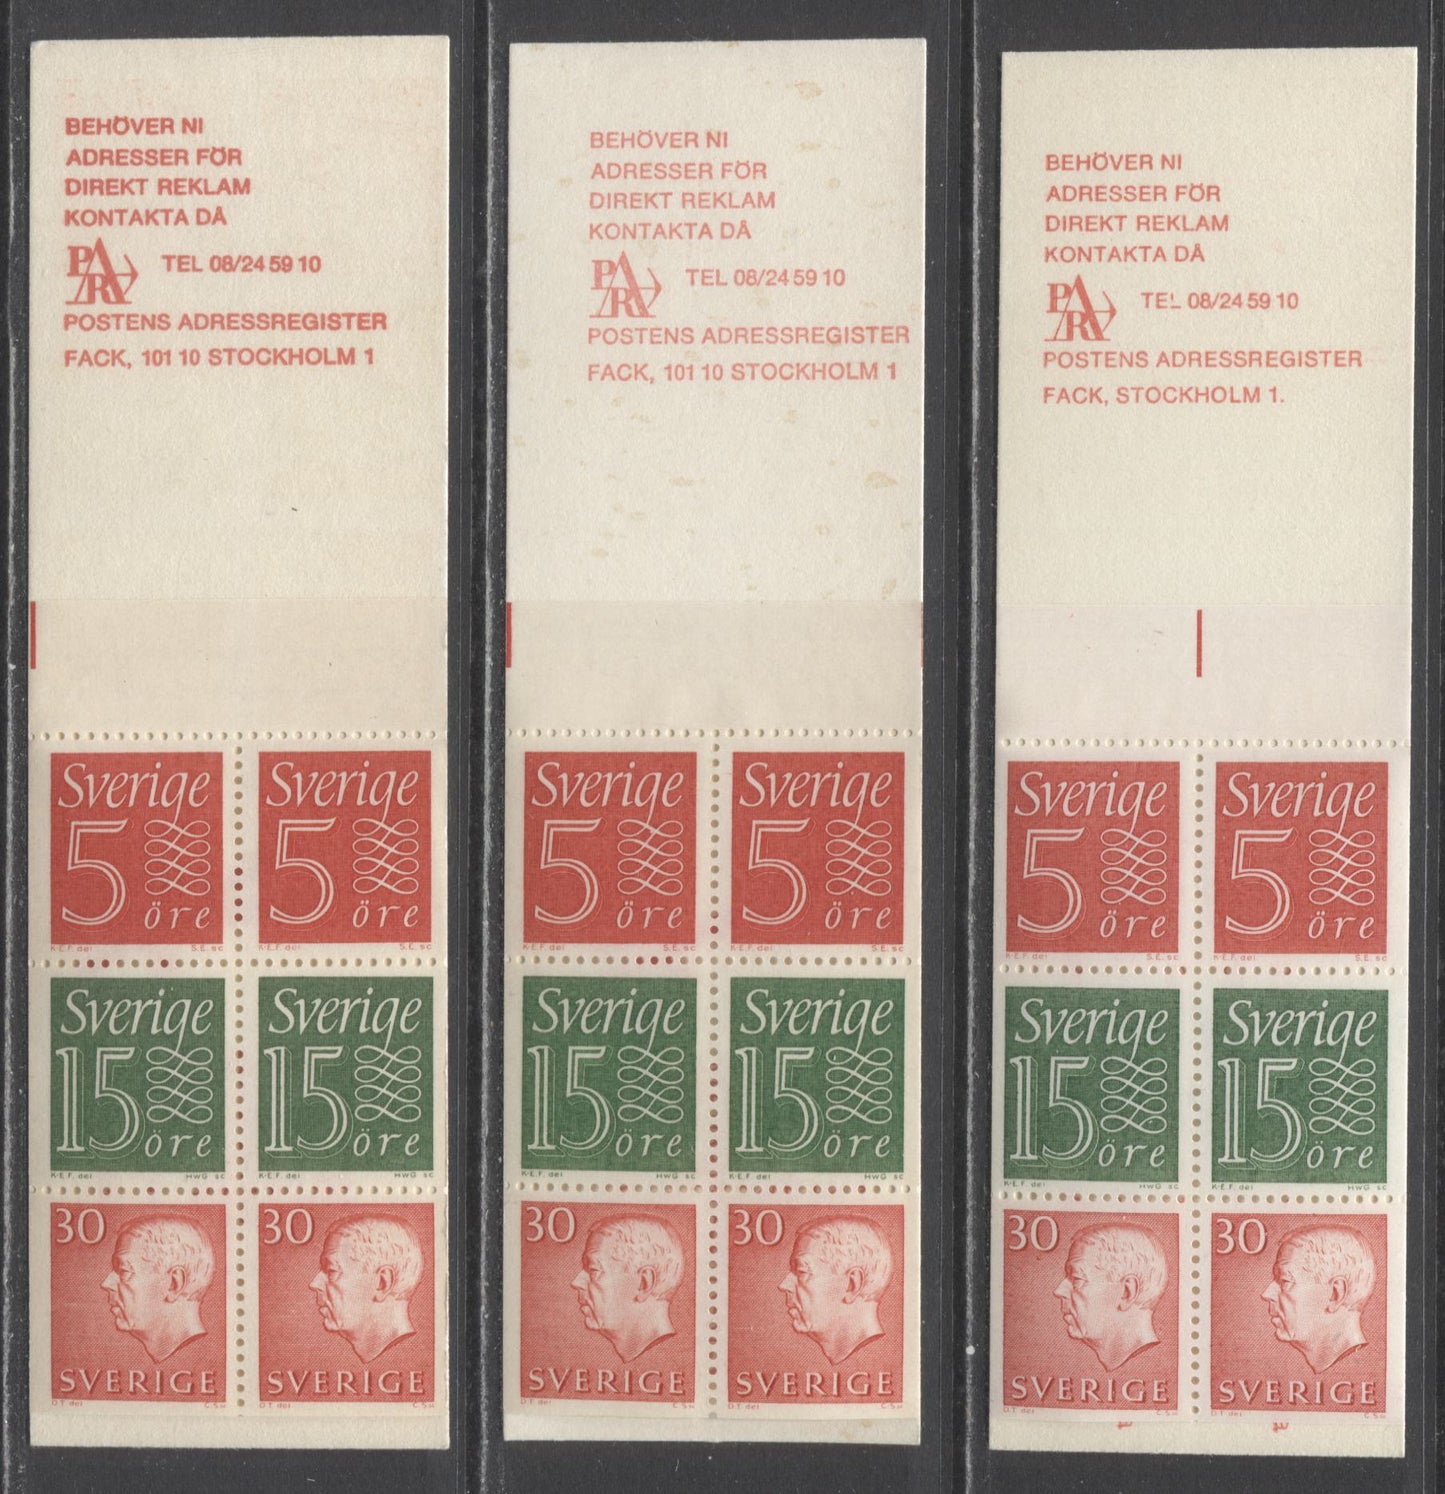 Lot 185 Sweden SC#668a (Facit #HA15B1R)/668a (Facit #HA15E2R) 1966 King Gustav VI Adolf Definitive Issue, Different Cream Cover Designs & Stocks, Upright Panes, Central and Bisected Registration Lines, 3 VFNH Booklets of 6 (2 +2 +2),  Estimated Value $7